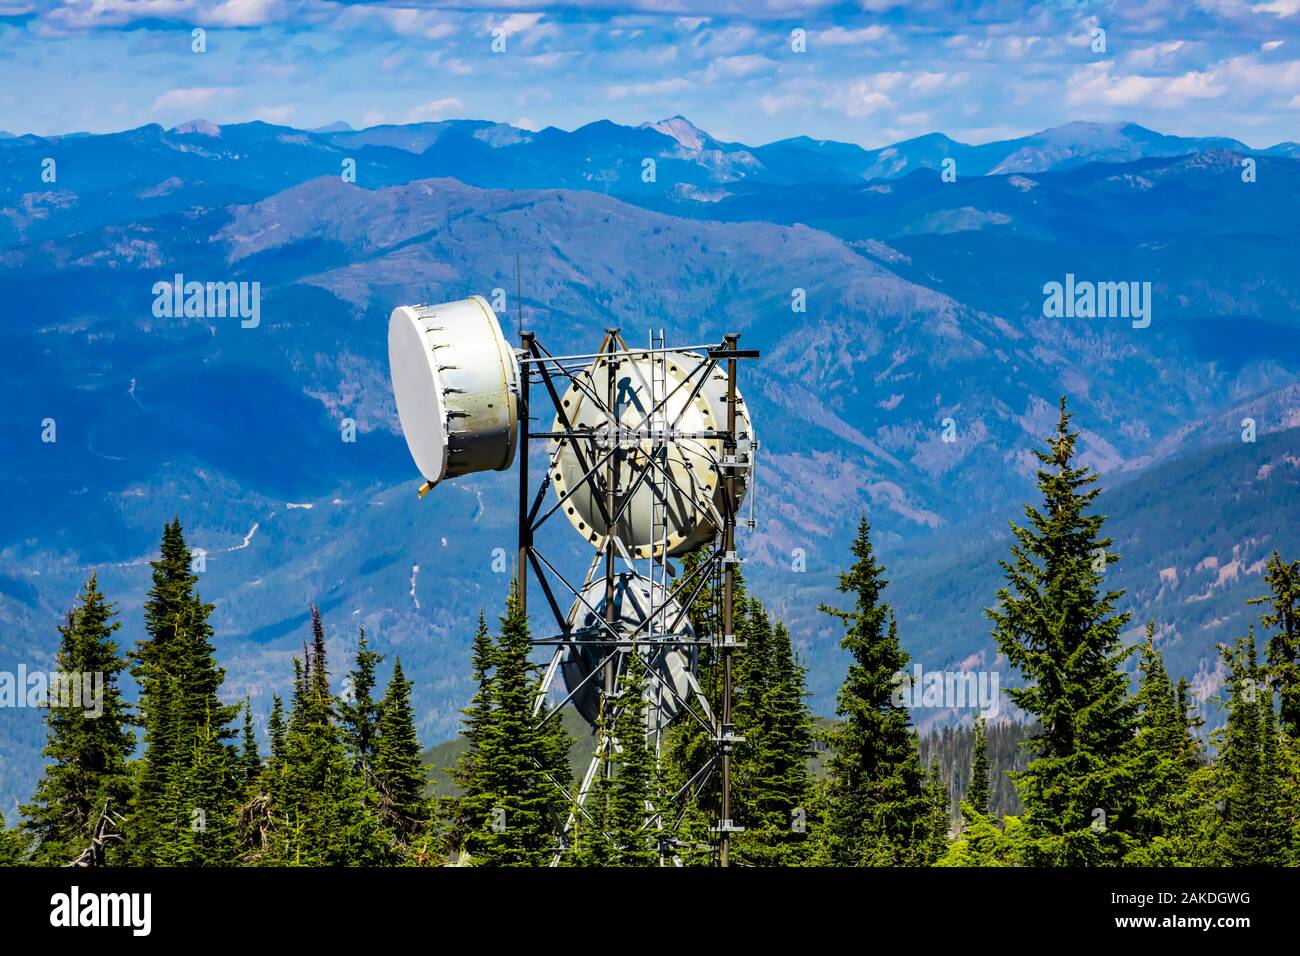 Juxtaposition of a cellular network tower emitting EMF radiation pollution in rural Canada with a scenic view of the Rocky Mountains and pine trees Stock Photo